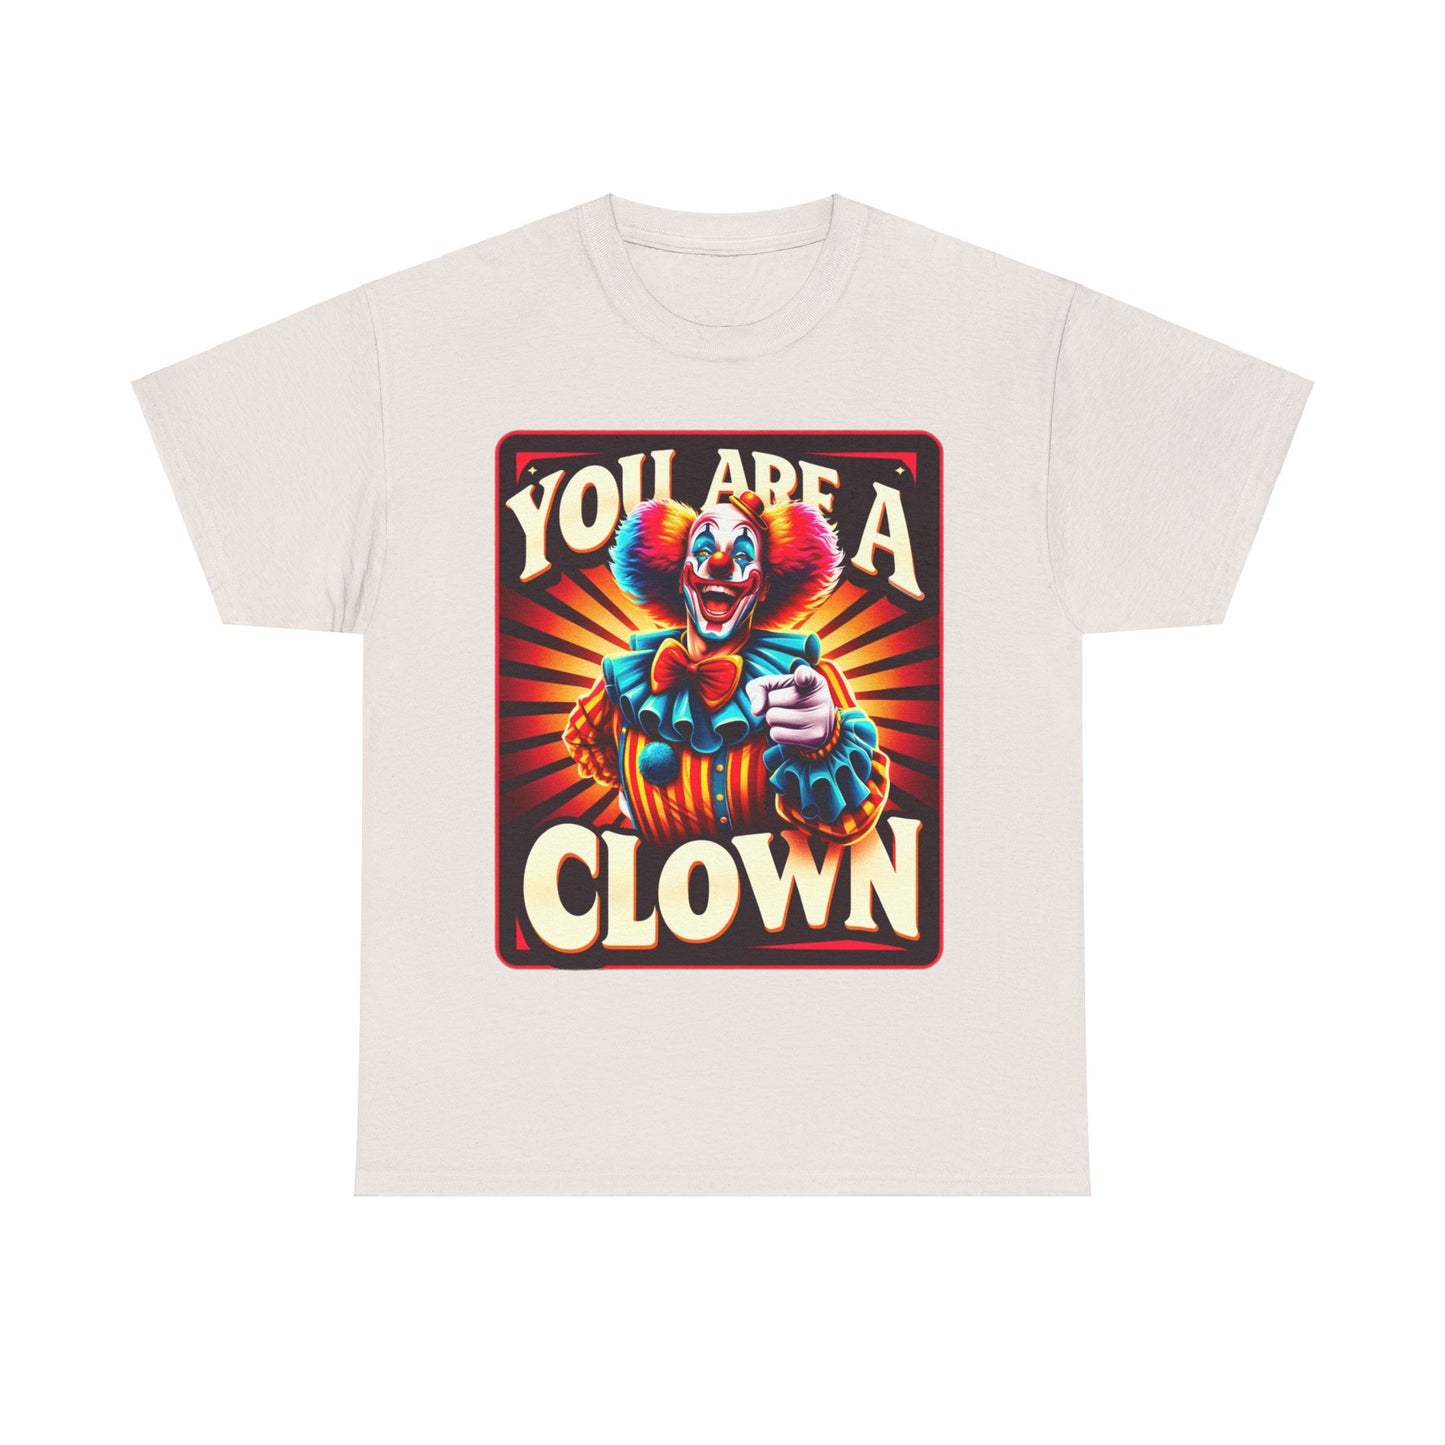 "Buy Now: 'You are a Clown' T-Shirt – Viral Pin-Up Style Tee for a Bold, Humorous Look" 🎪🤡